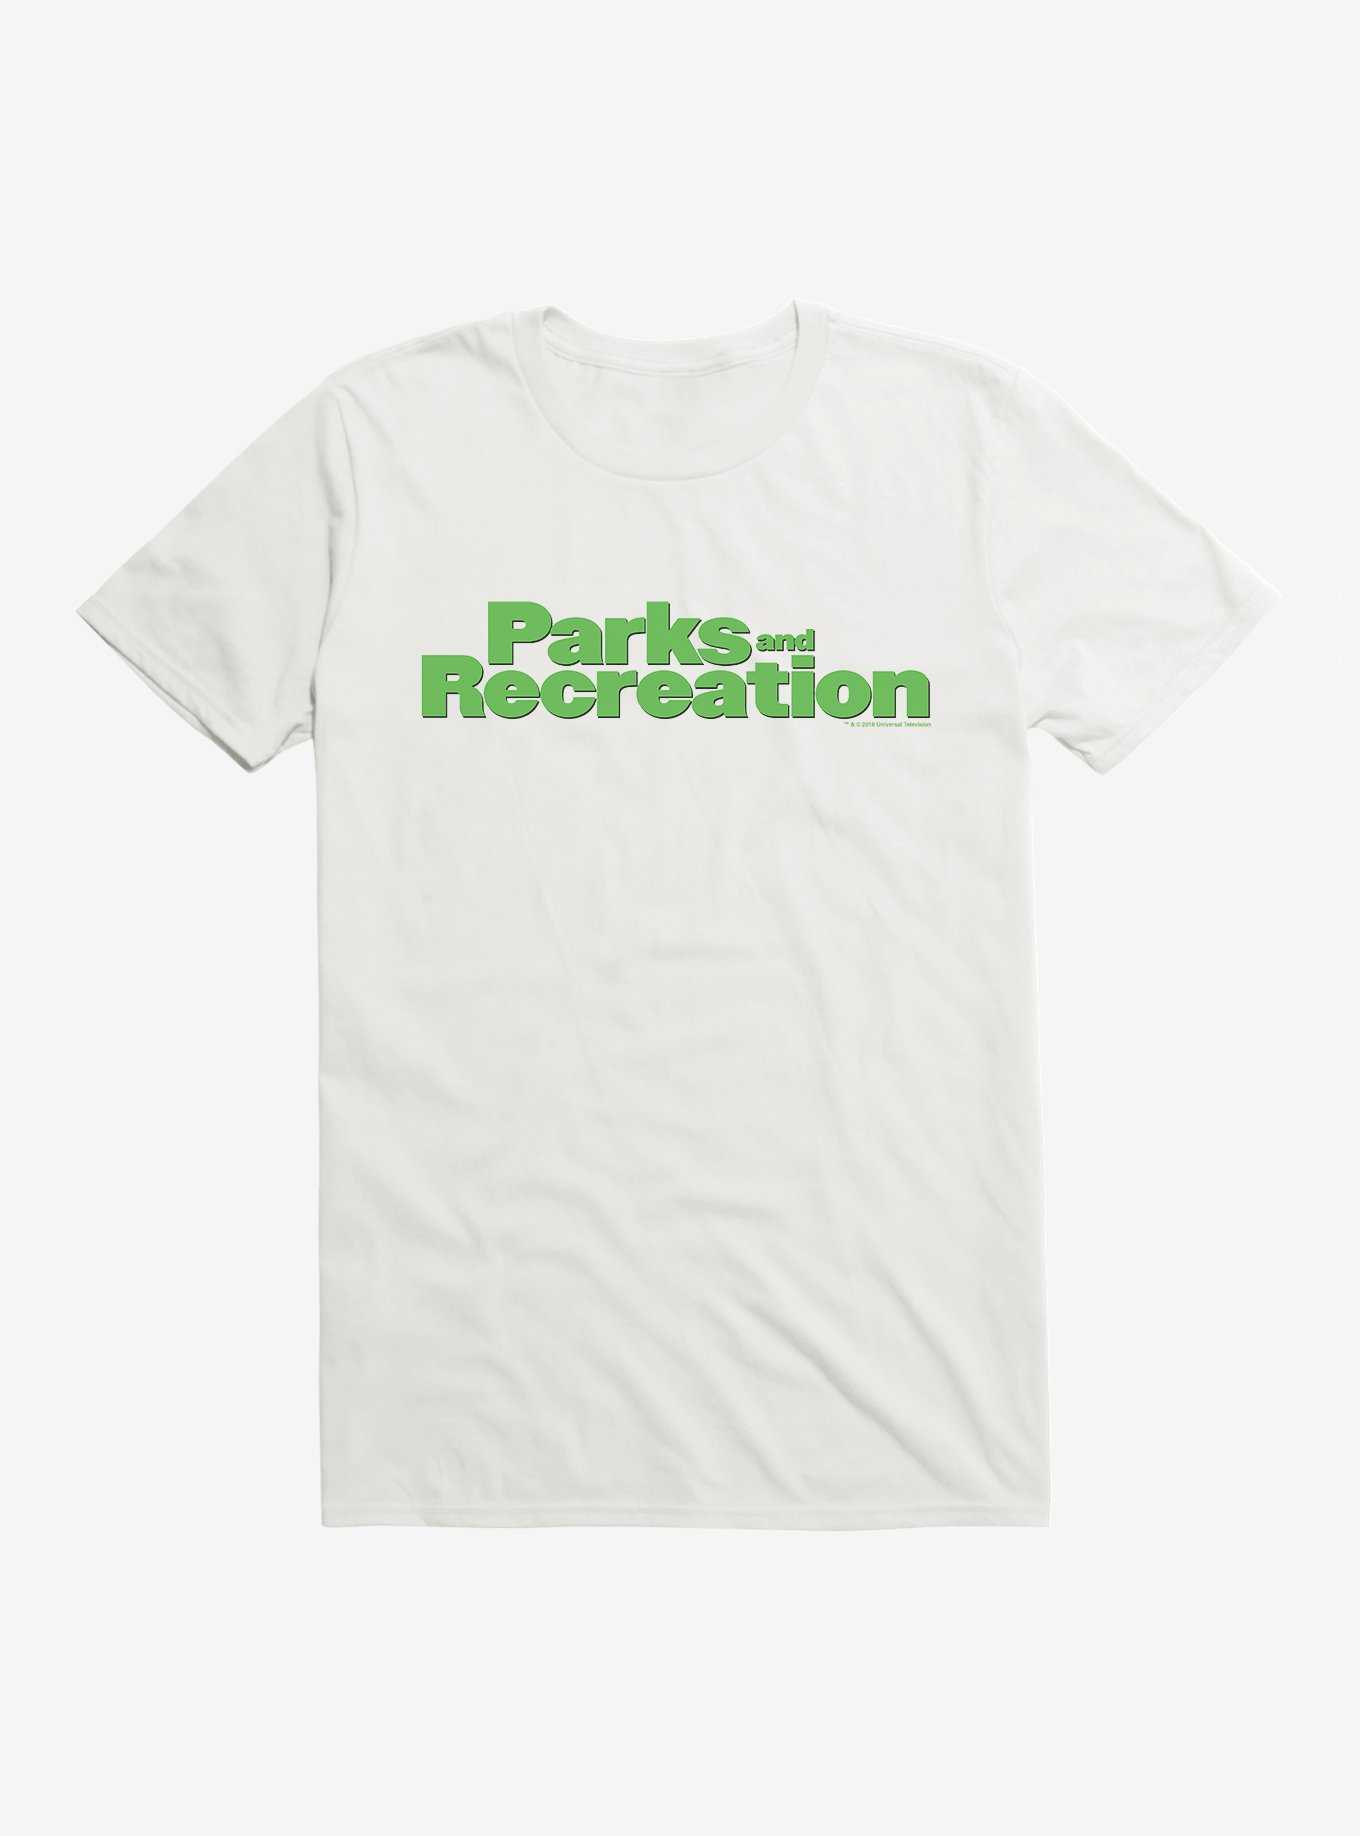 Parks And Recreation Bold Logo T-Shirt, WHITE, hi-res